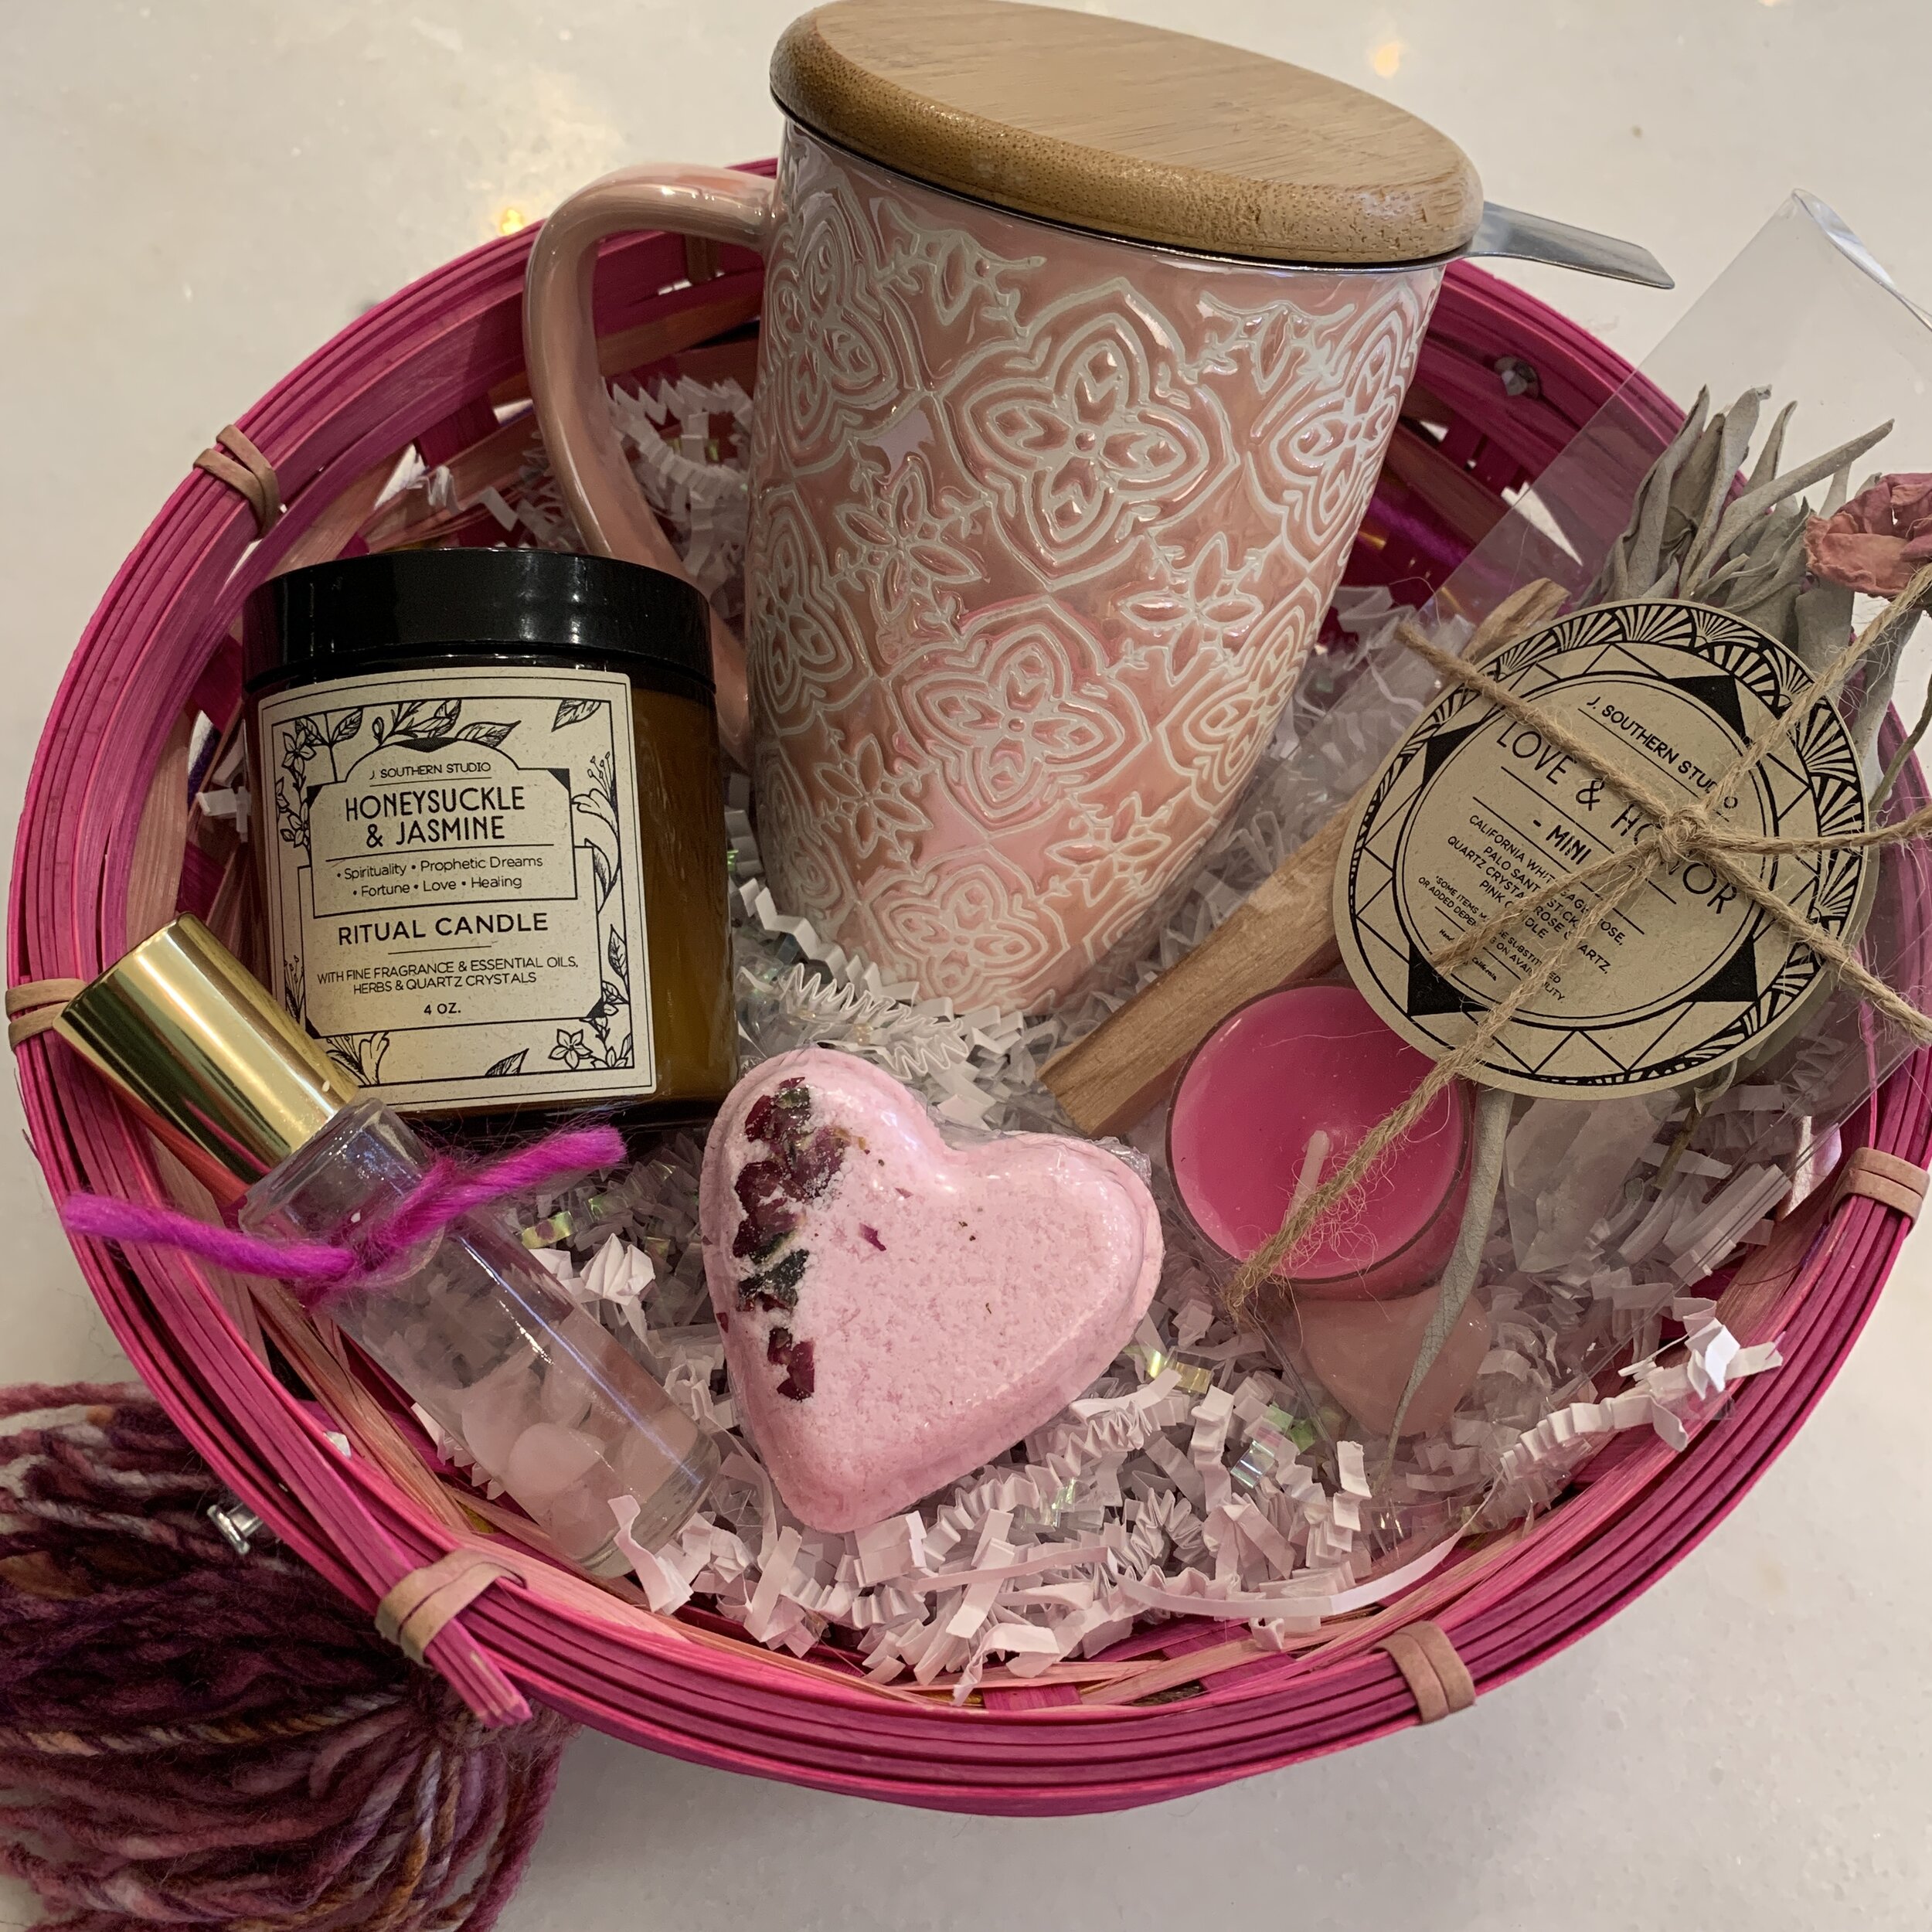 Quarantine Self-Care Essentials Gift Sets - Free Local Delivery